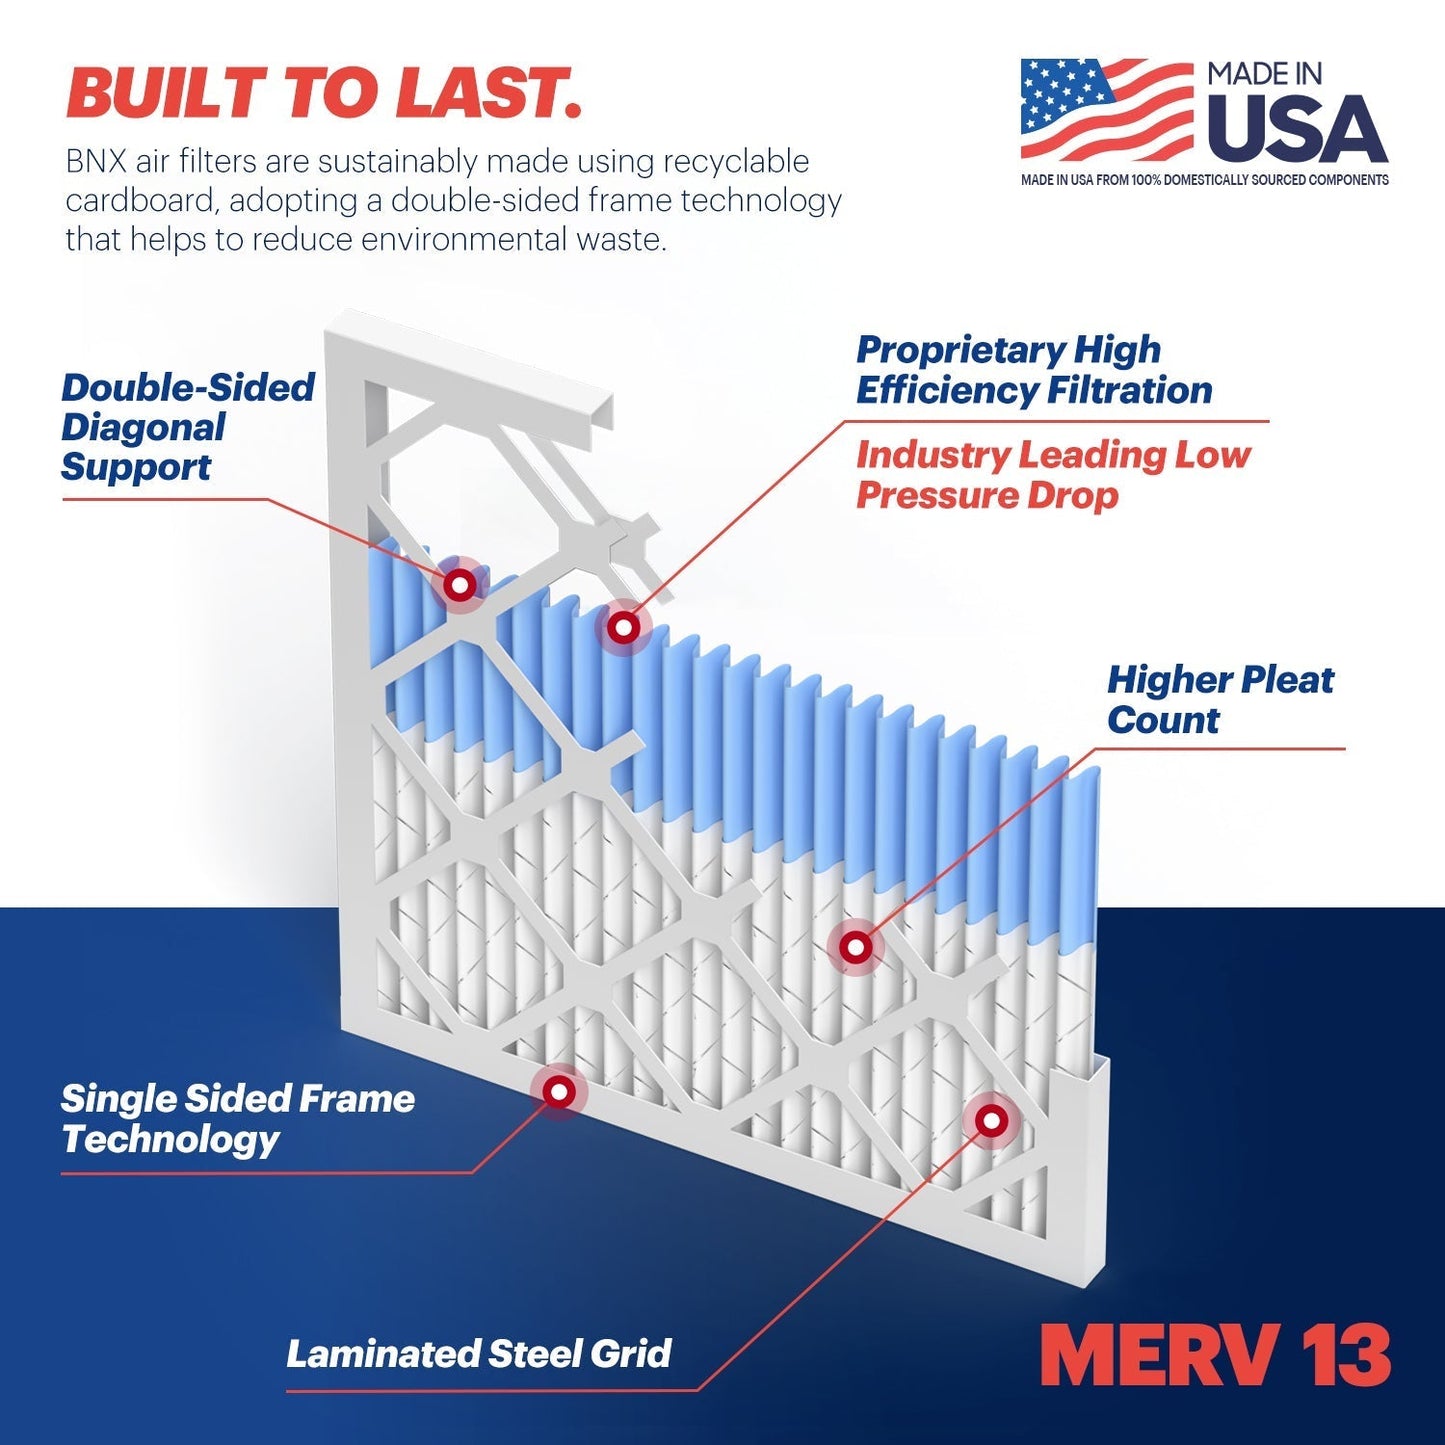 BNX TruFilter 14x14x1 MERV 13 Pleated Air Filter – Made in USA (6-Pack)